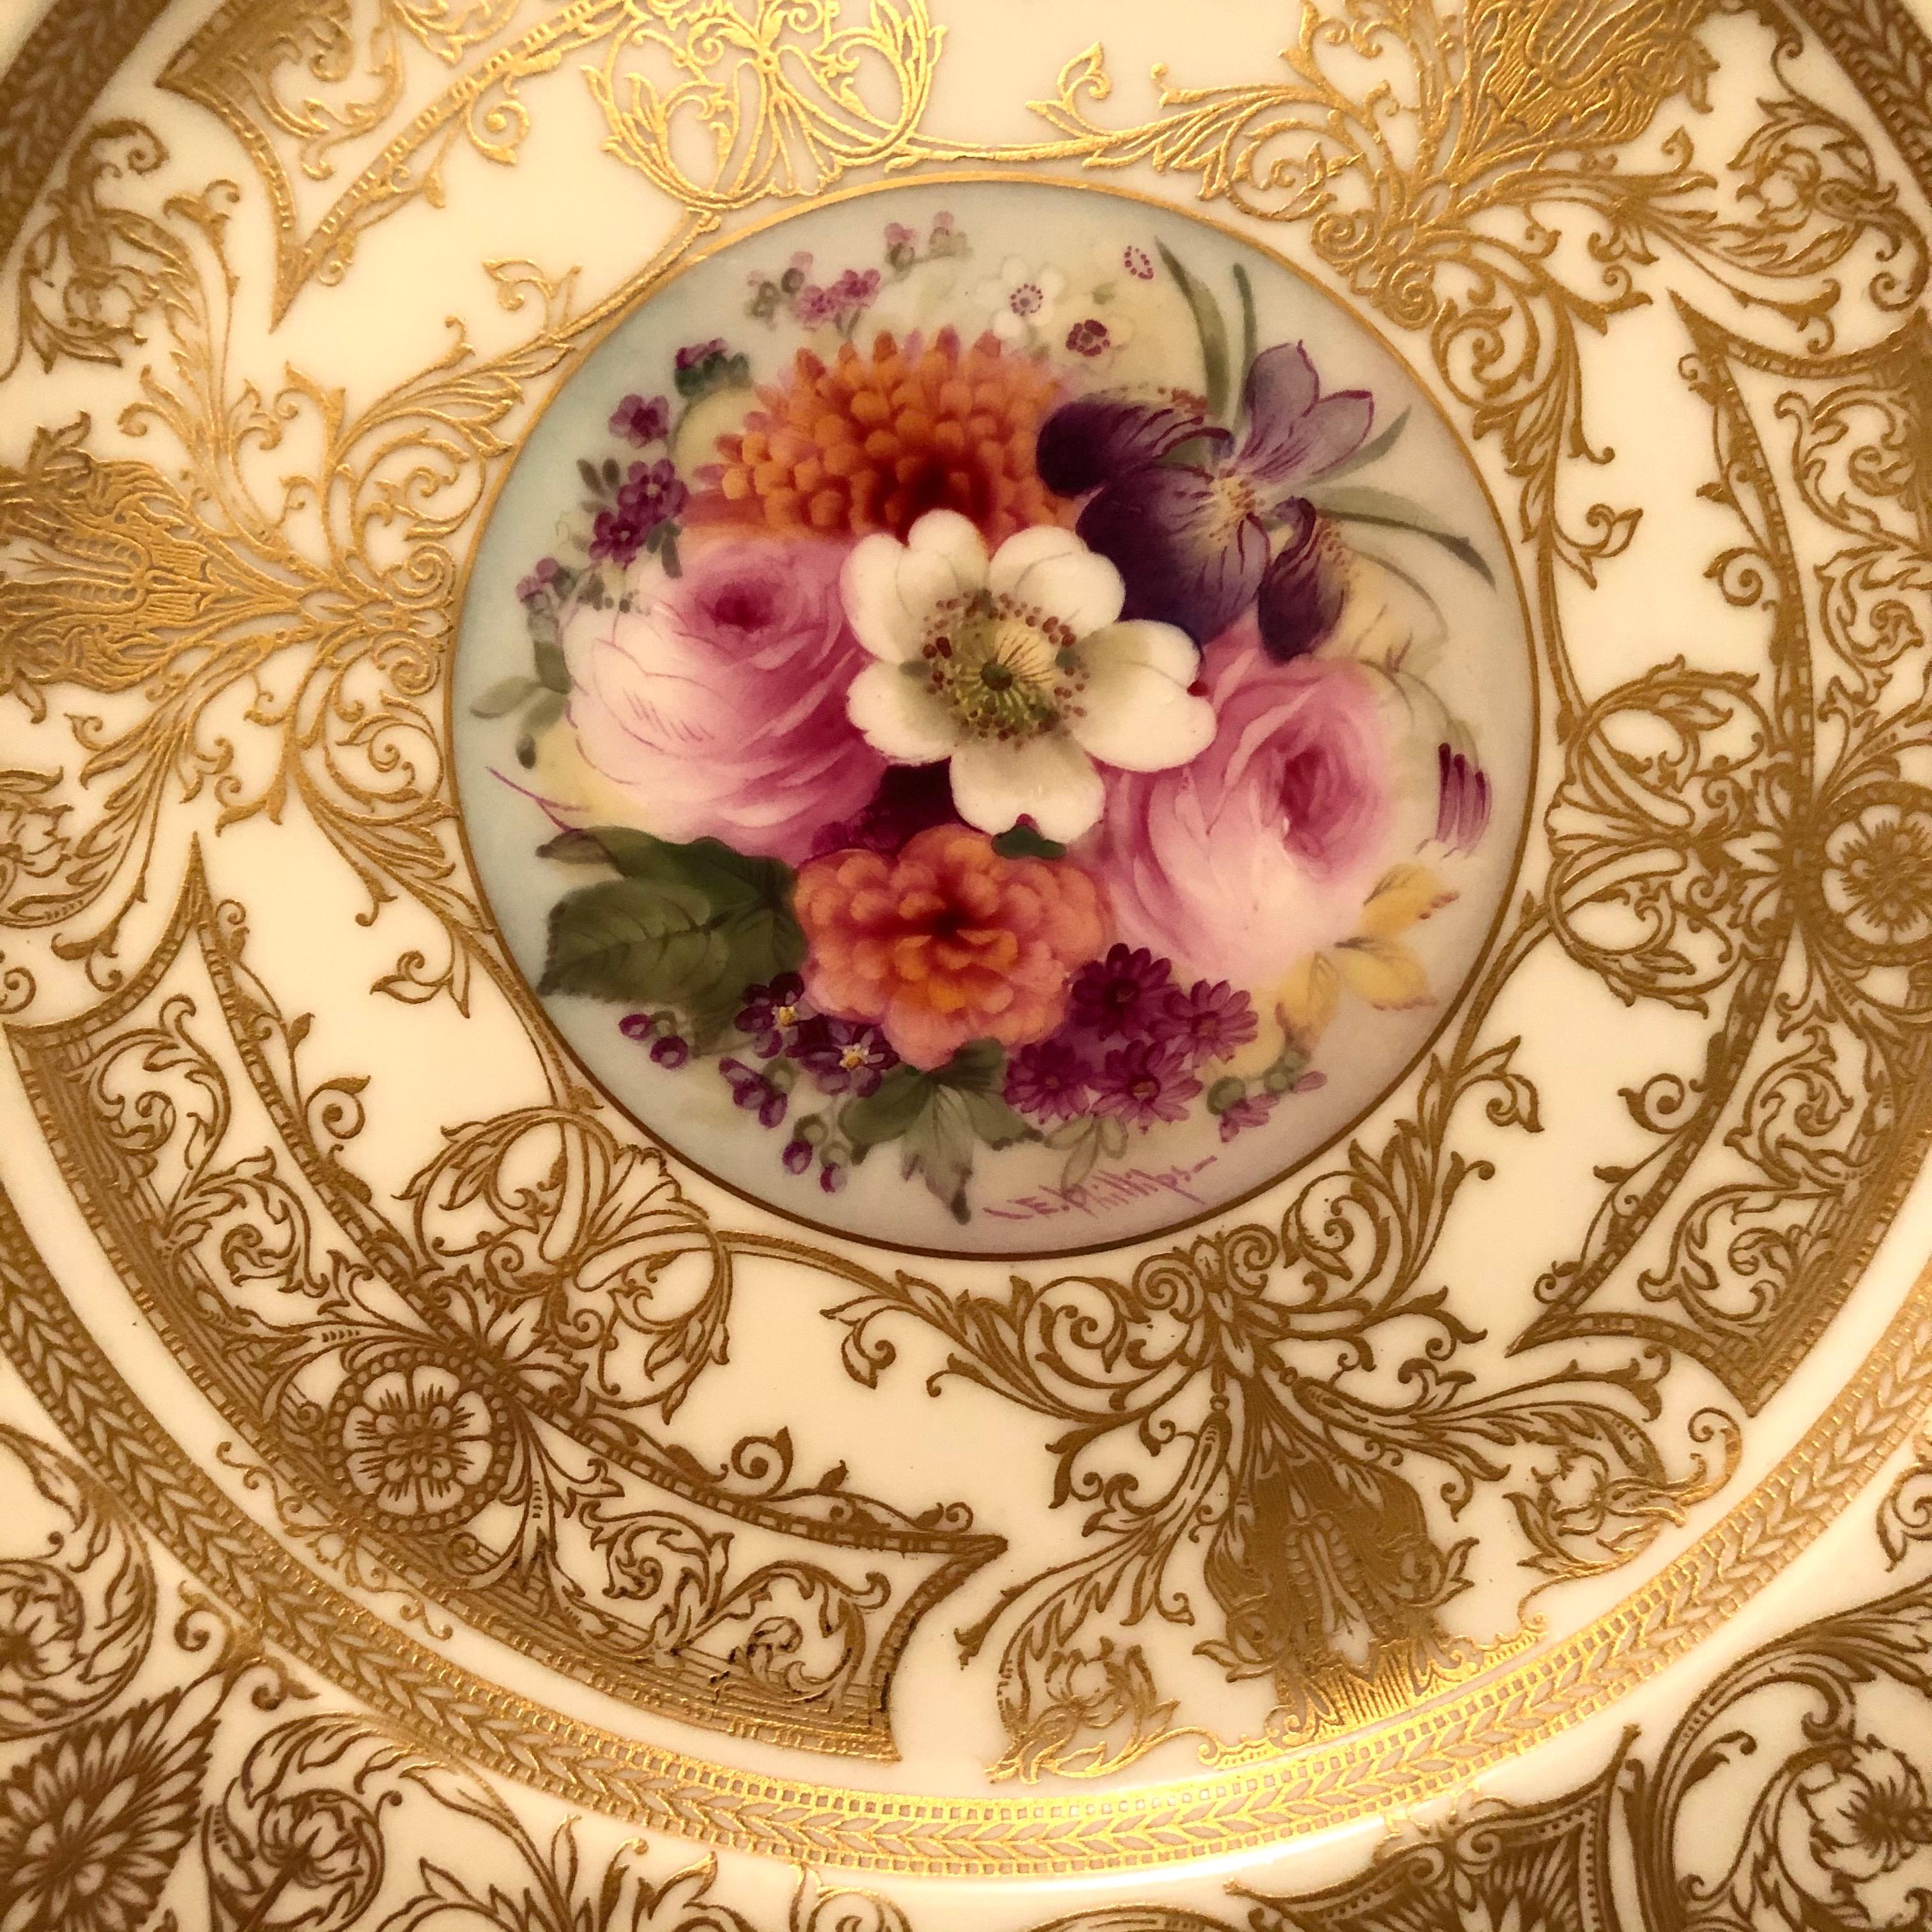 Set of 11 Royal Worcester Dinner Plates Painted with Different Flower Bouquets For Sale 5